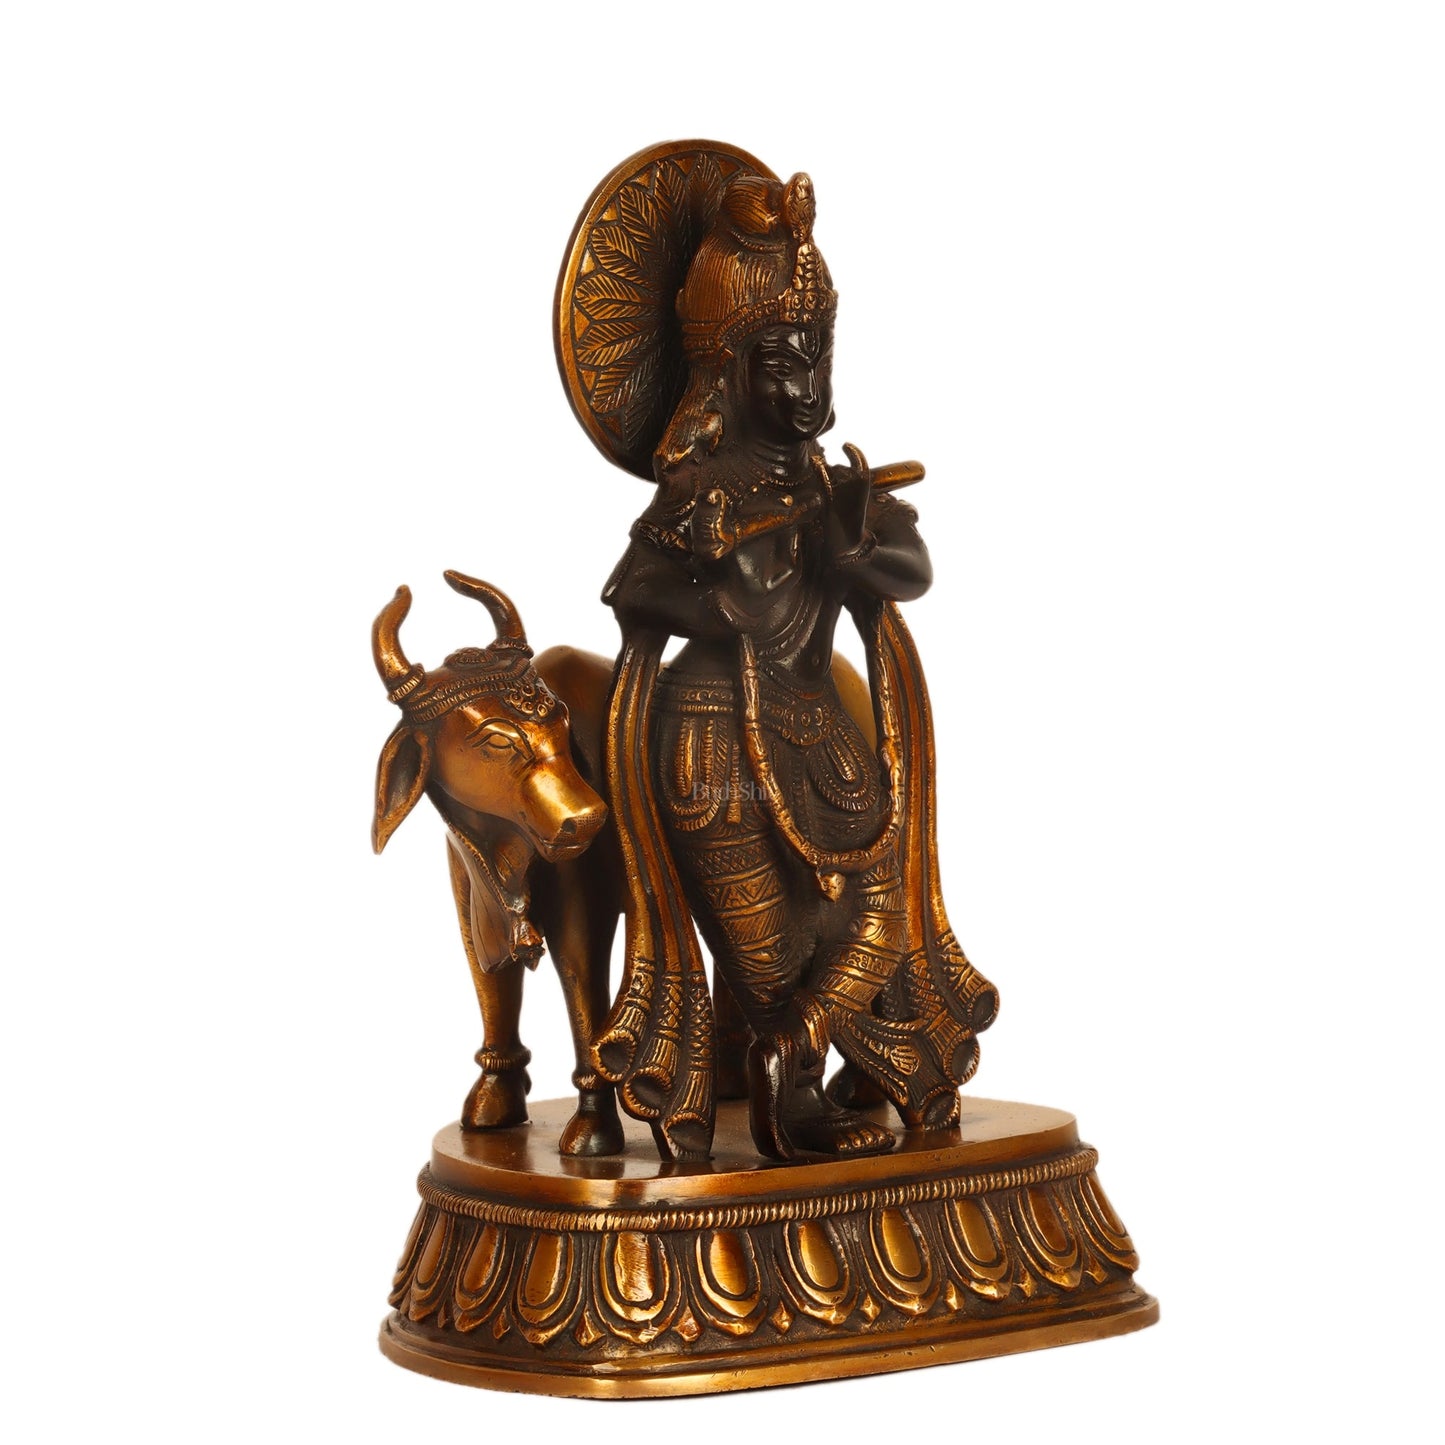 Divine Brass Statue of Lord Krishna with Cow | Black and Golden Finish | 9" Height - Budhshiv.com